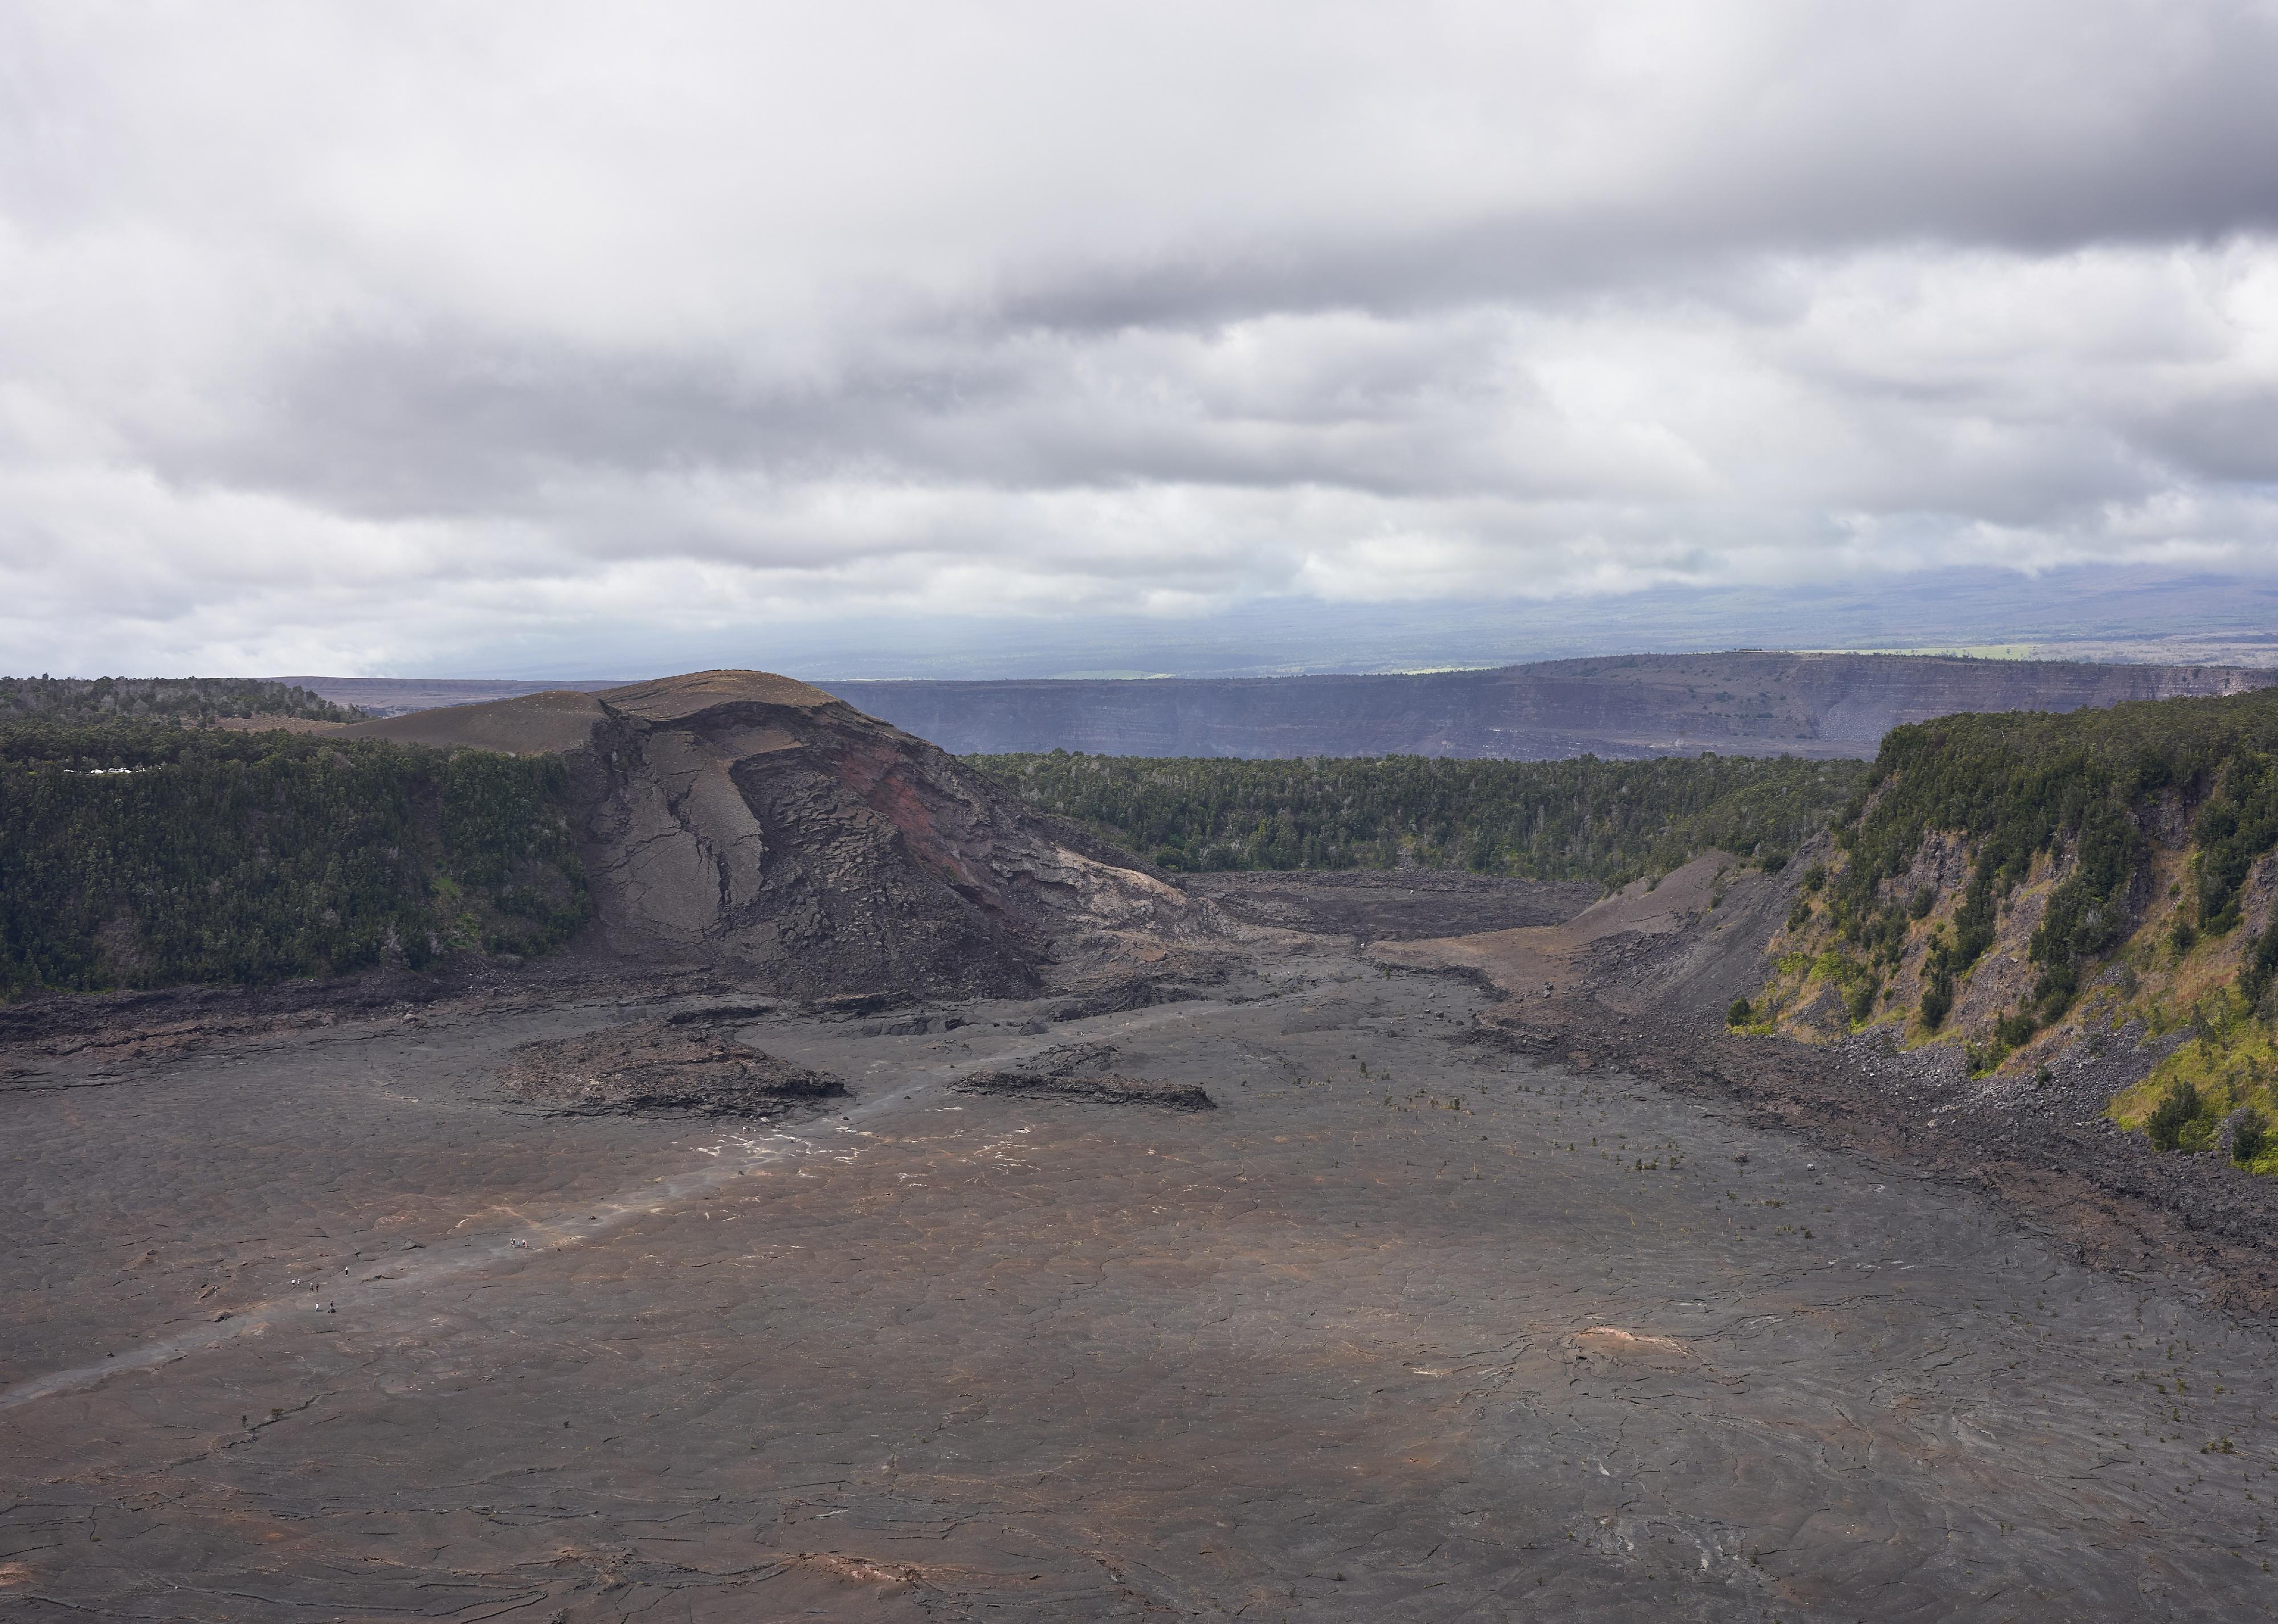 Aerial view of the solidified Kīlauea Iki Crater lava lake in Hawaii Volcanoes National Park.